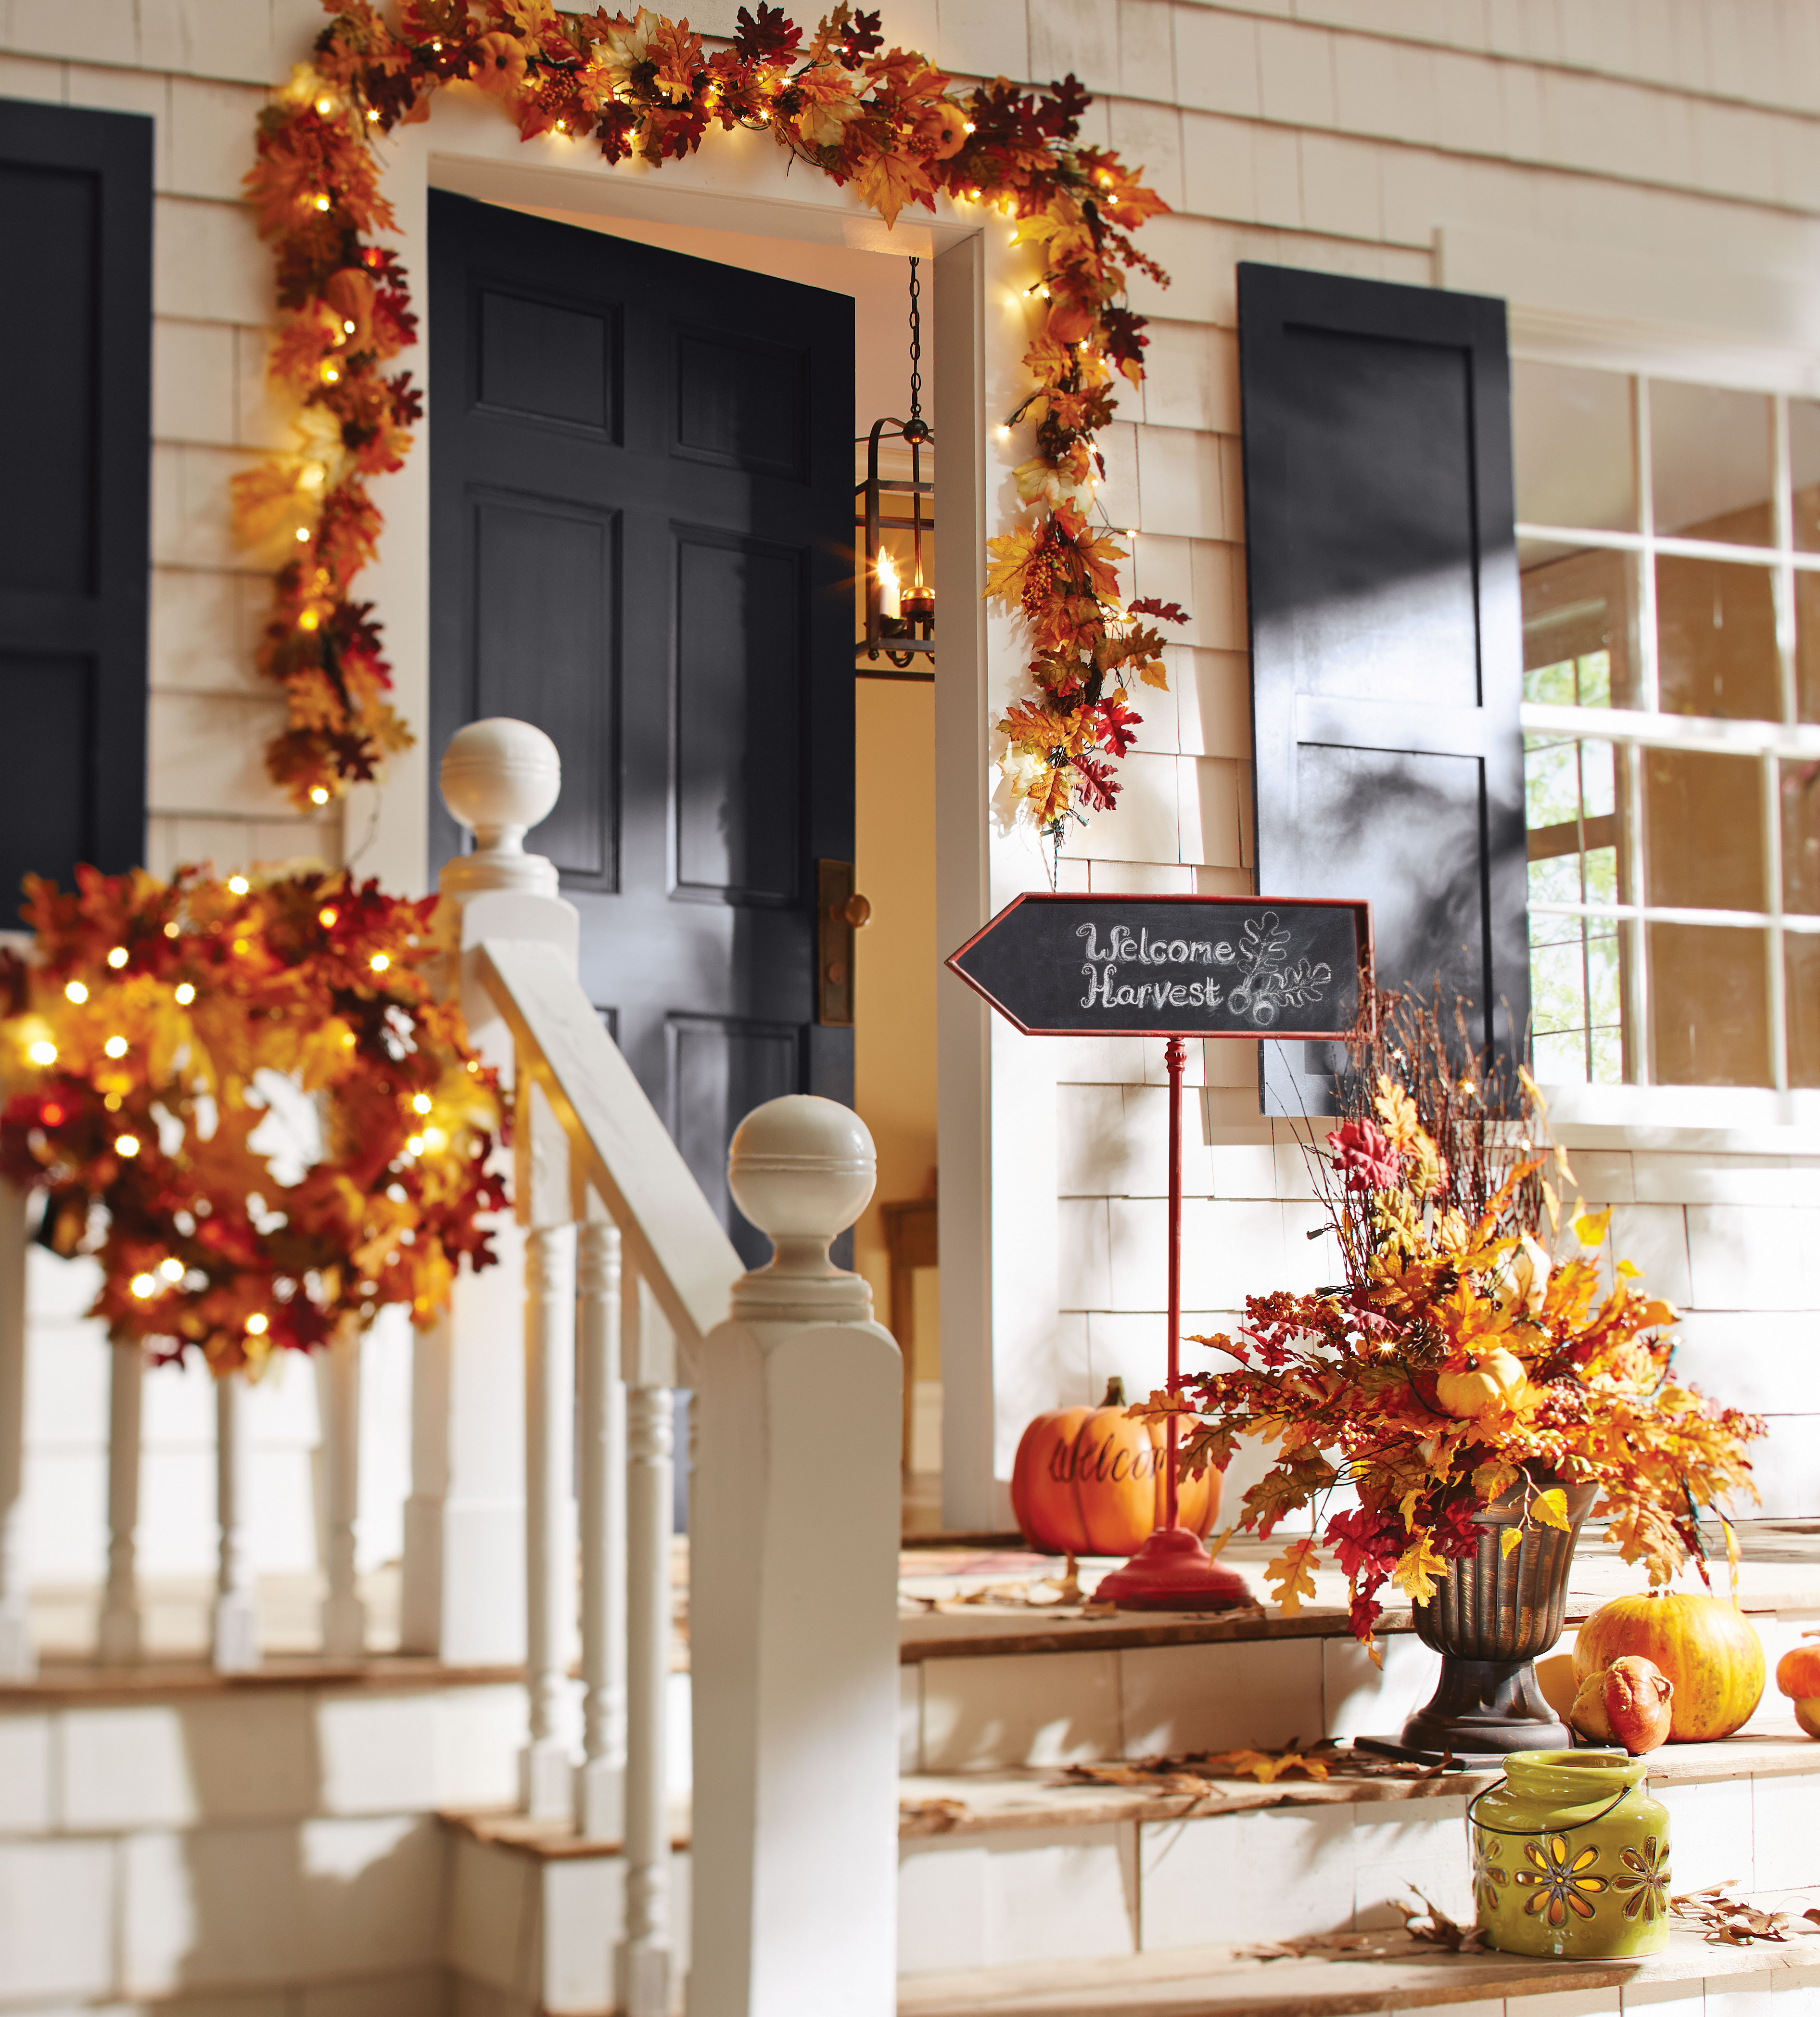 Fall Decoration For Front Porch
 Fall Decorating Ideas For Your Front Porch and Entryway